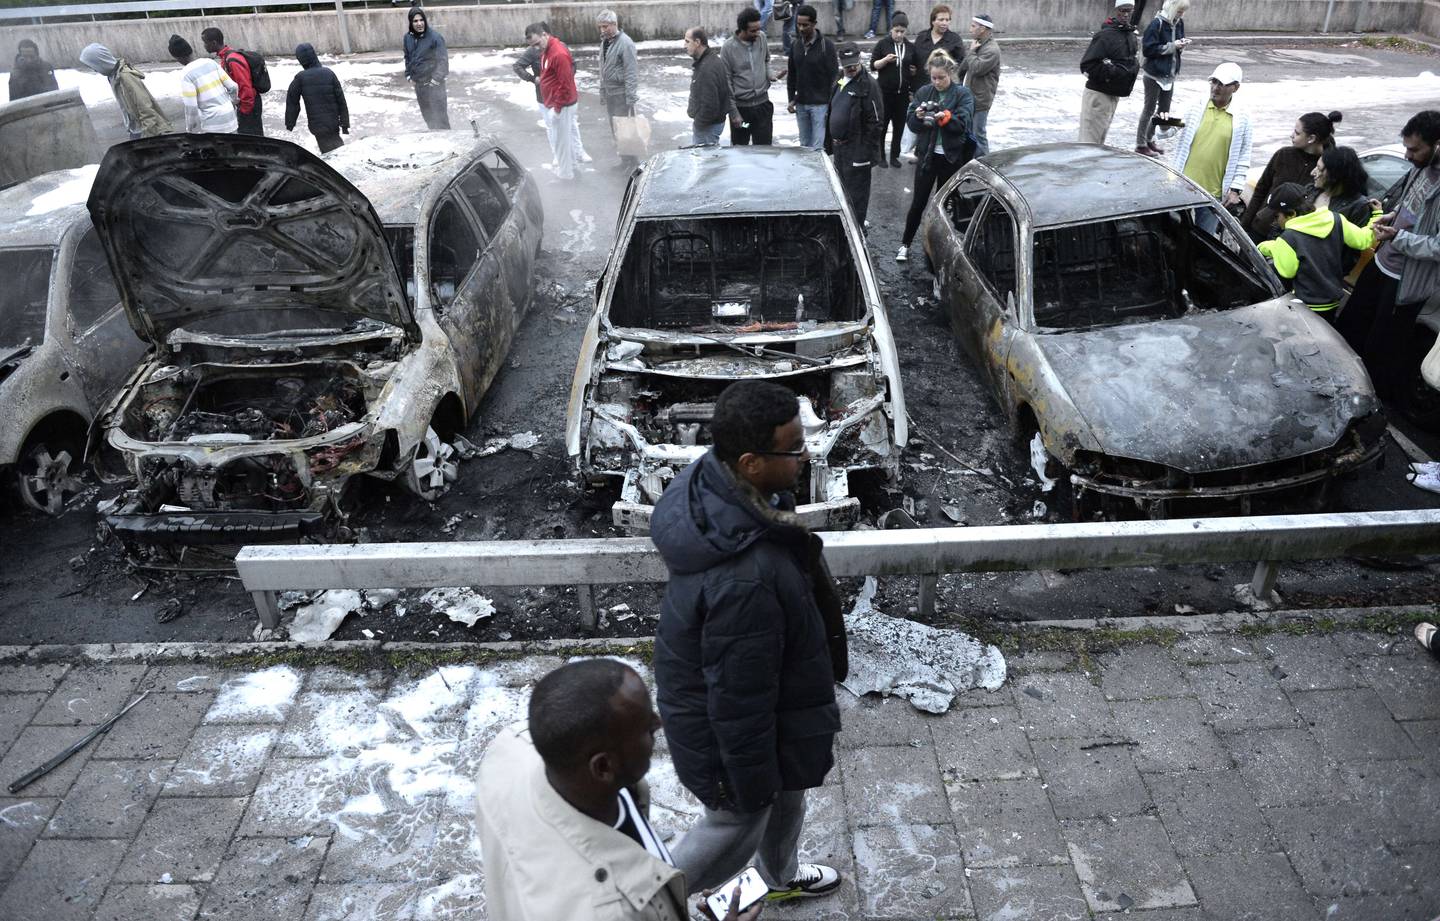 People inspect the scene where cars stand gutted by fire in the Stockholm suburb of Rinkeby after youths rioted in several different suburbs around Stockholm, Sweden for a fourth consecutive night on May 23, 2013. In the suburb of Husby, where the riots began on Sunday in response to the fatal police shooting of a 69-year-old machete-wielding man, 80 percent of residents are immigrants and the unrest has highlighted Sweden's failure to integrate swathes of its immigrant population, but in this small, consensus-driven country, there was little agreement on how to solve the problem.  AFP PHOTO / JONATHAN NACKSTRAND